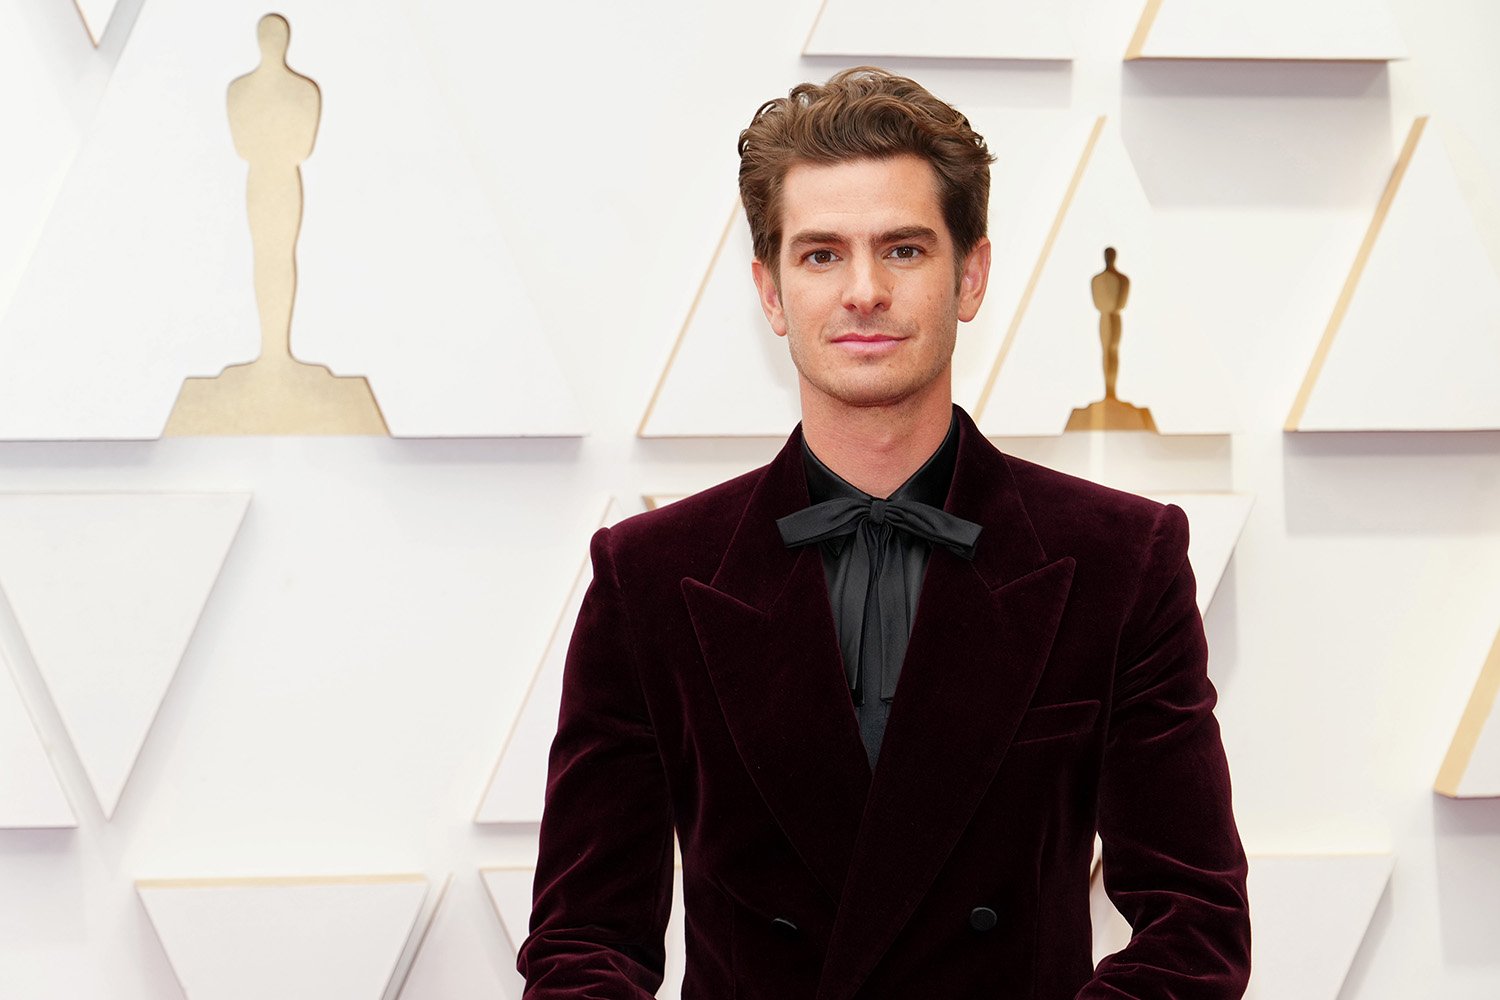 The Amazing Spider-Man star Andrew Garfield attends the Oscars 2022.